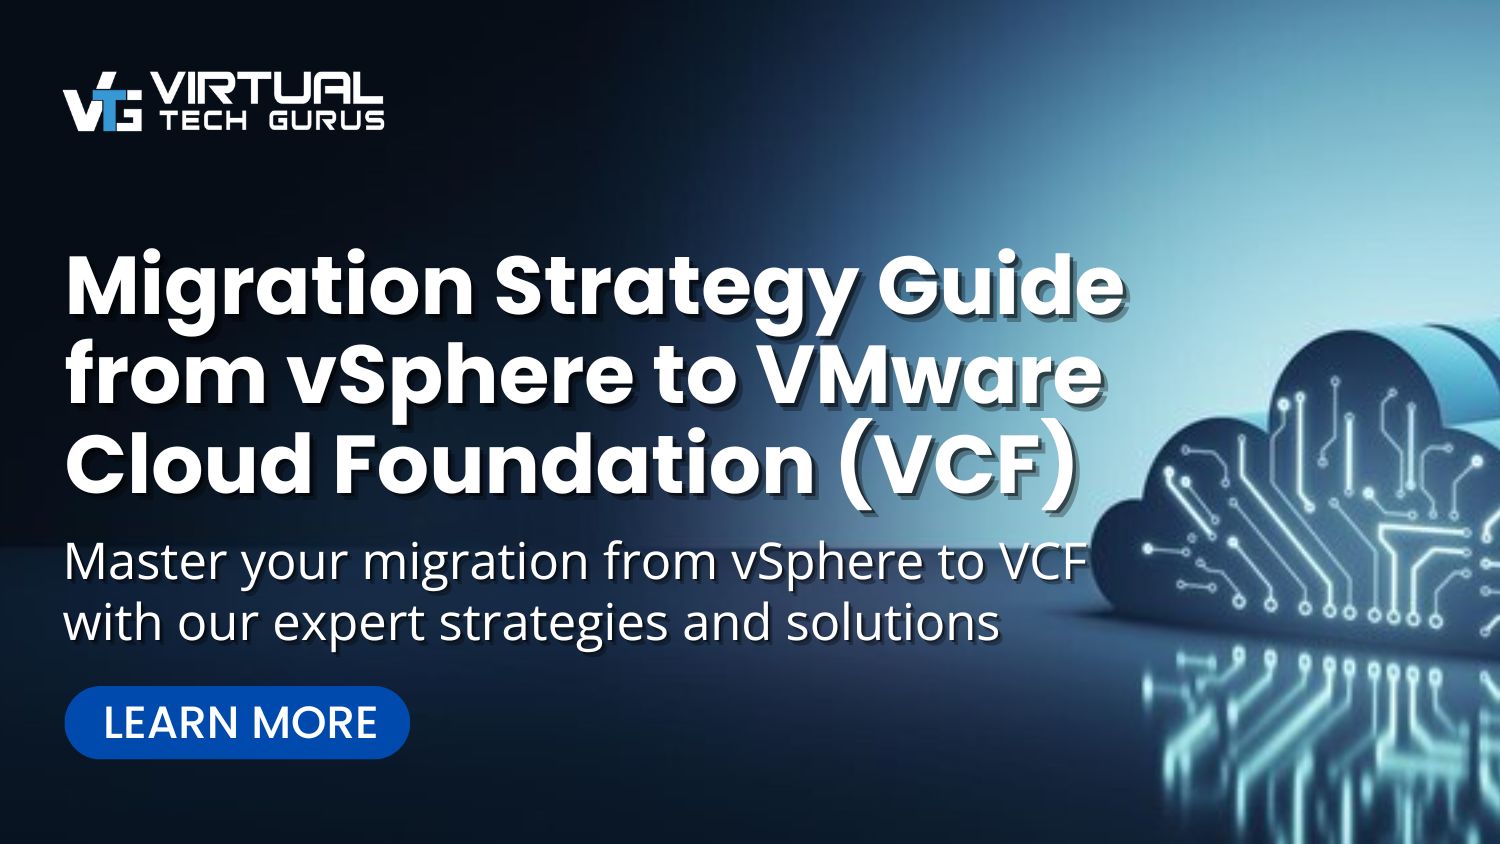 Migration Strategy Guide from vSphere to VMware Cloud Foundation (VCF)